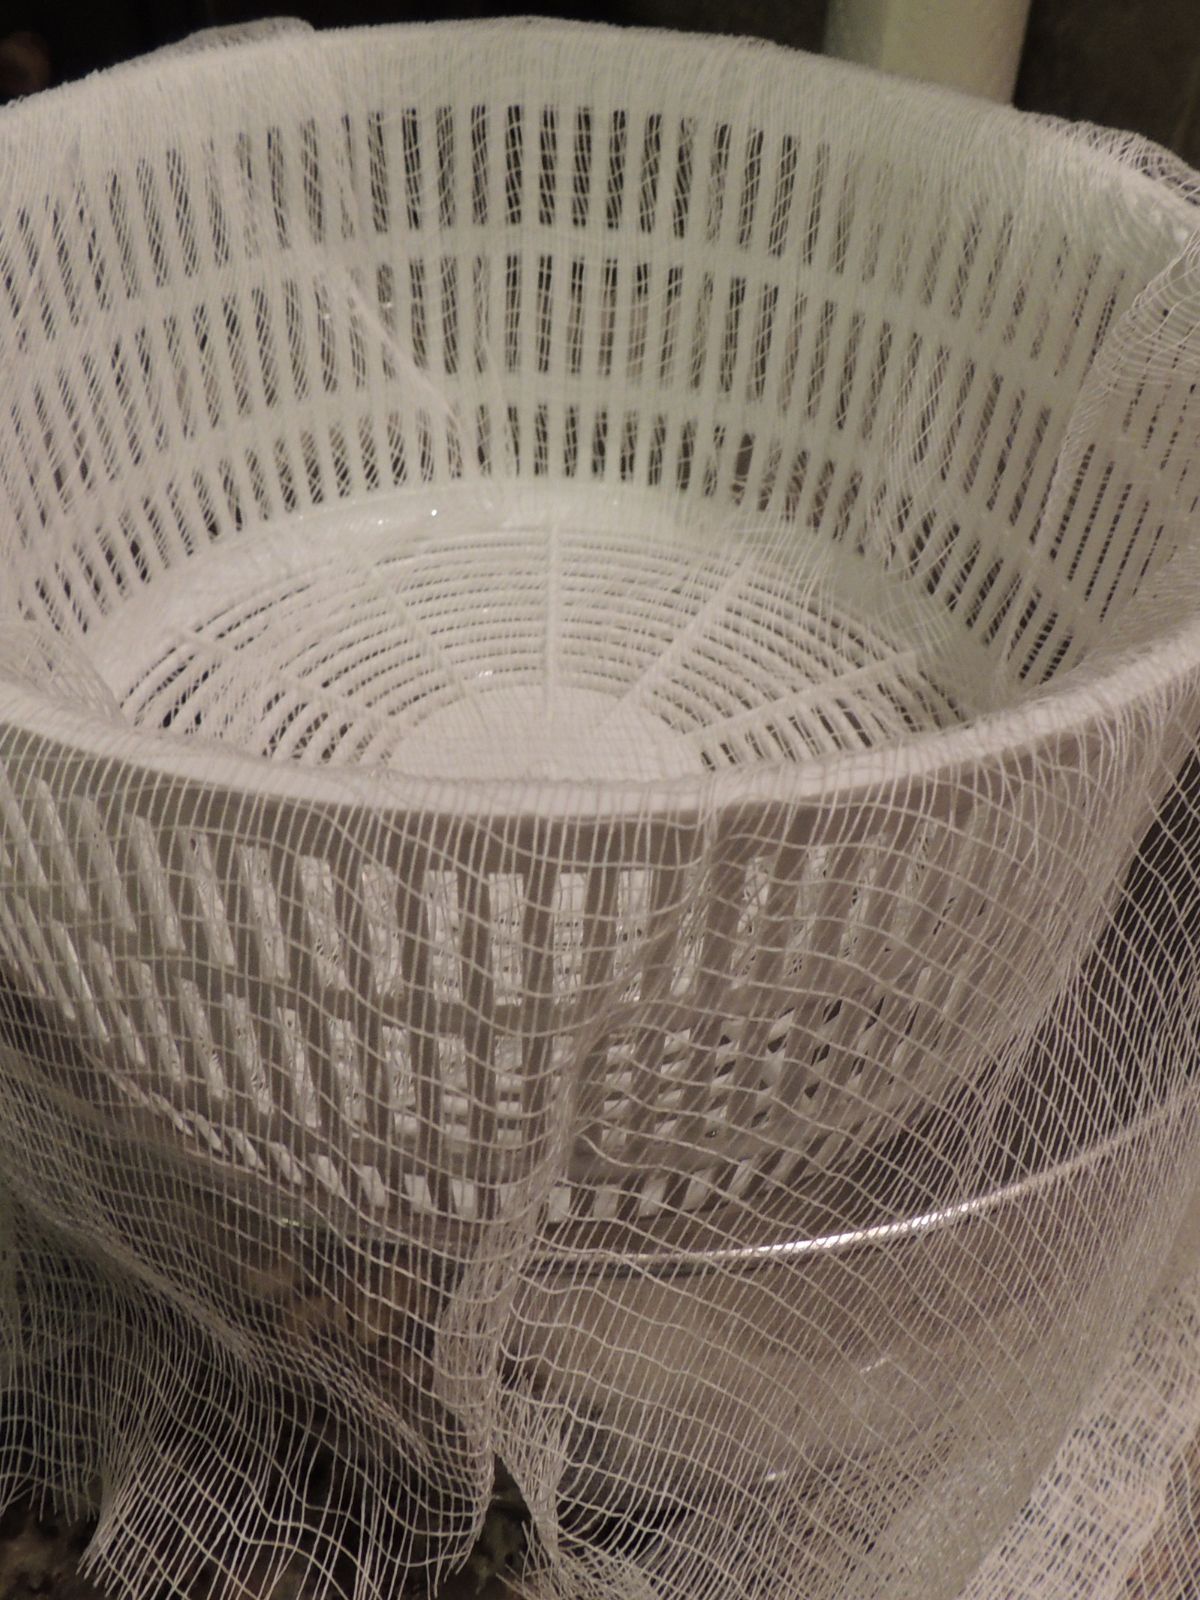 cheesecloth over strainer.